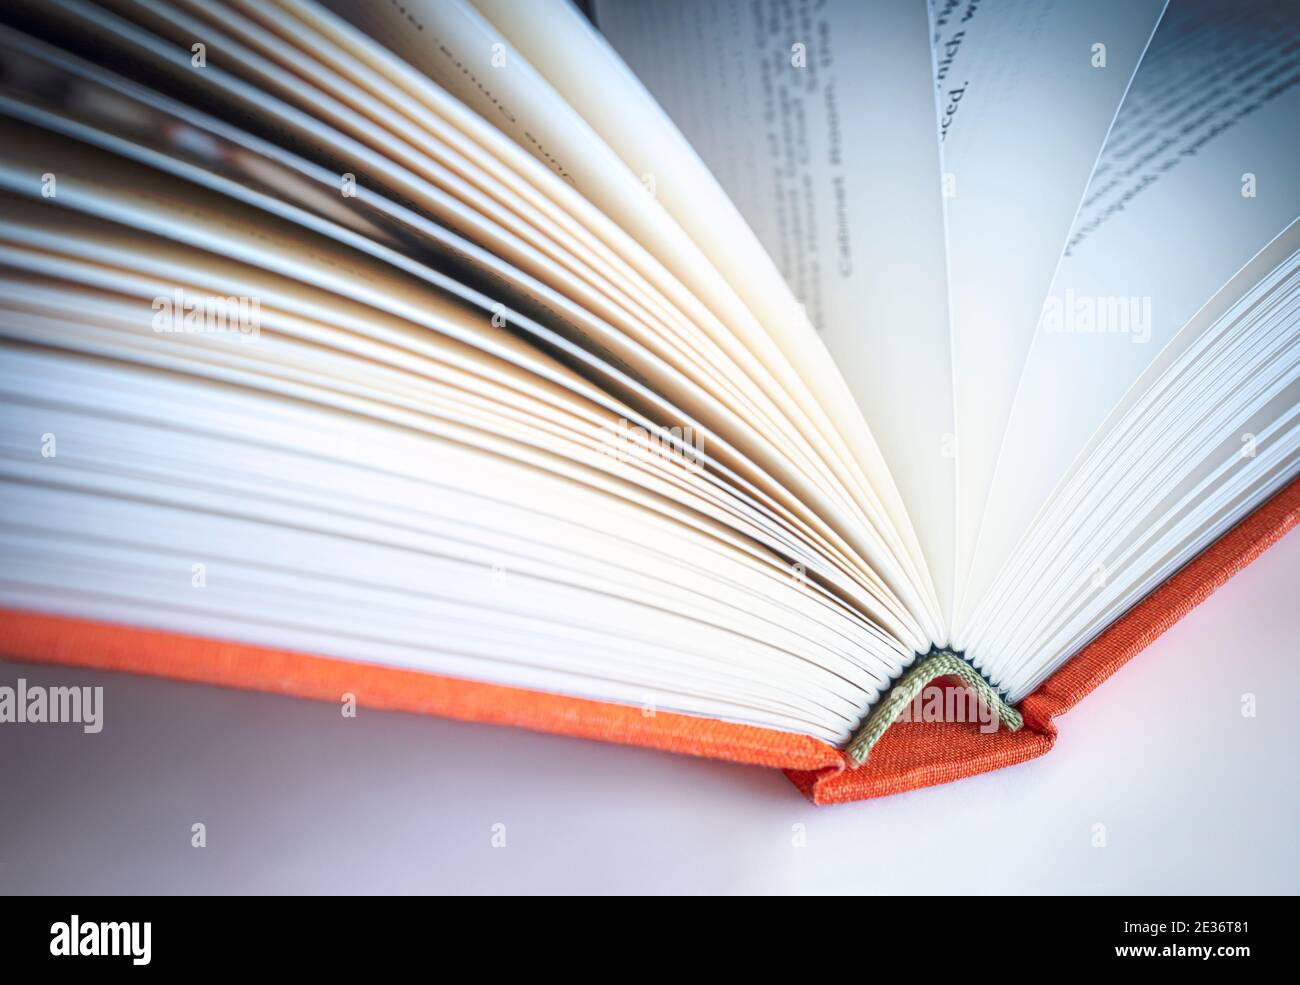 Shallow focus against open book. Direct focus on spine of book and unfocused pages works like copy space Stock Photo